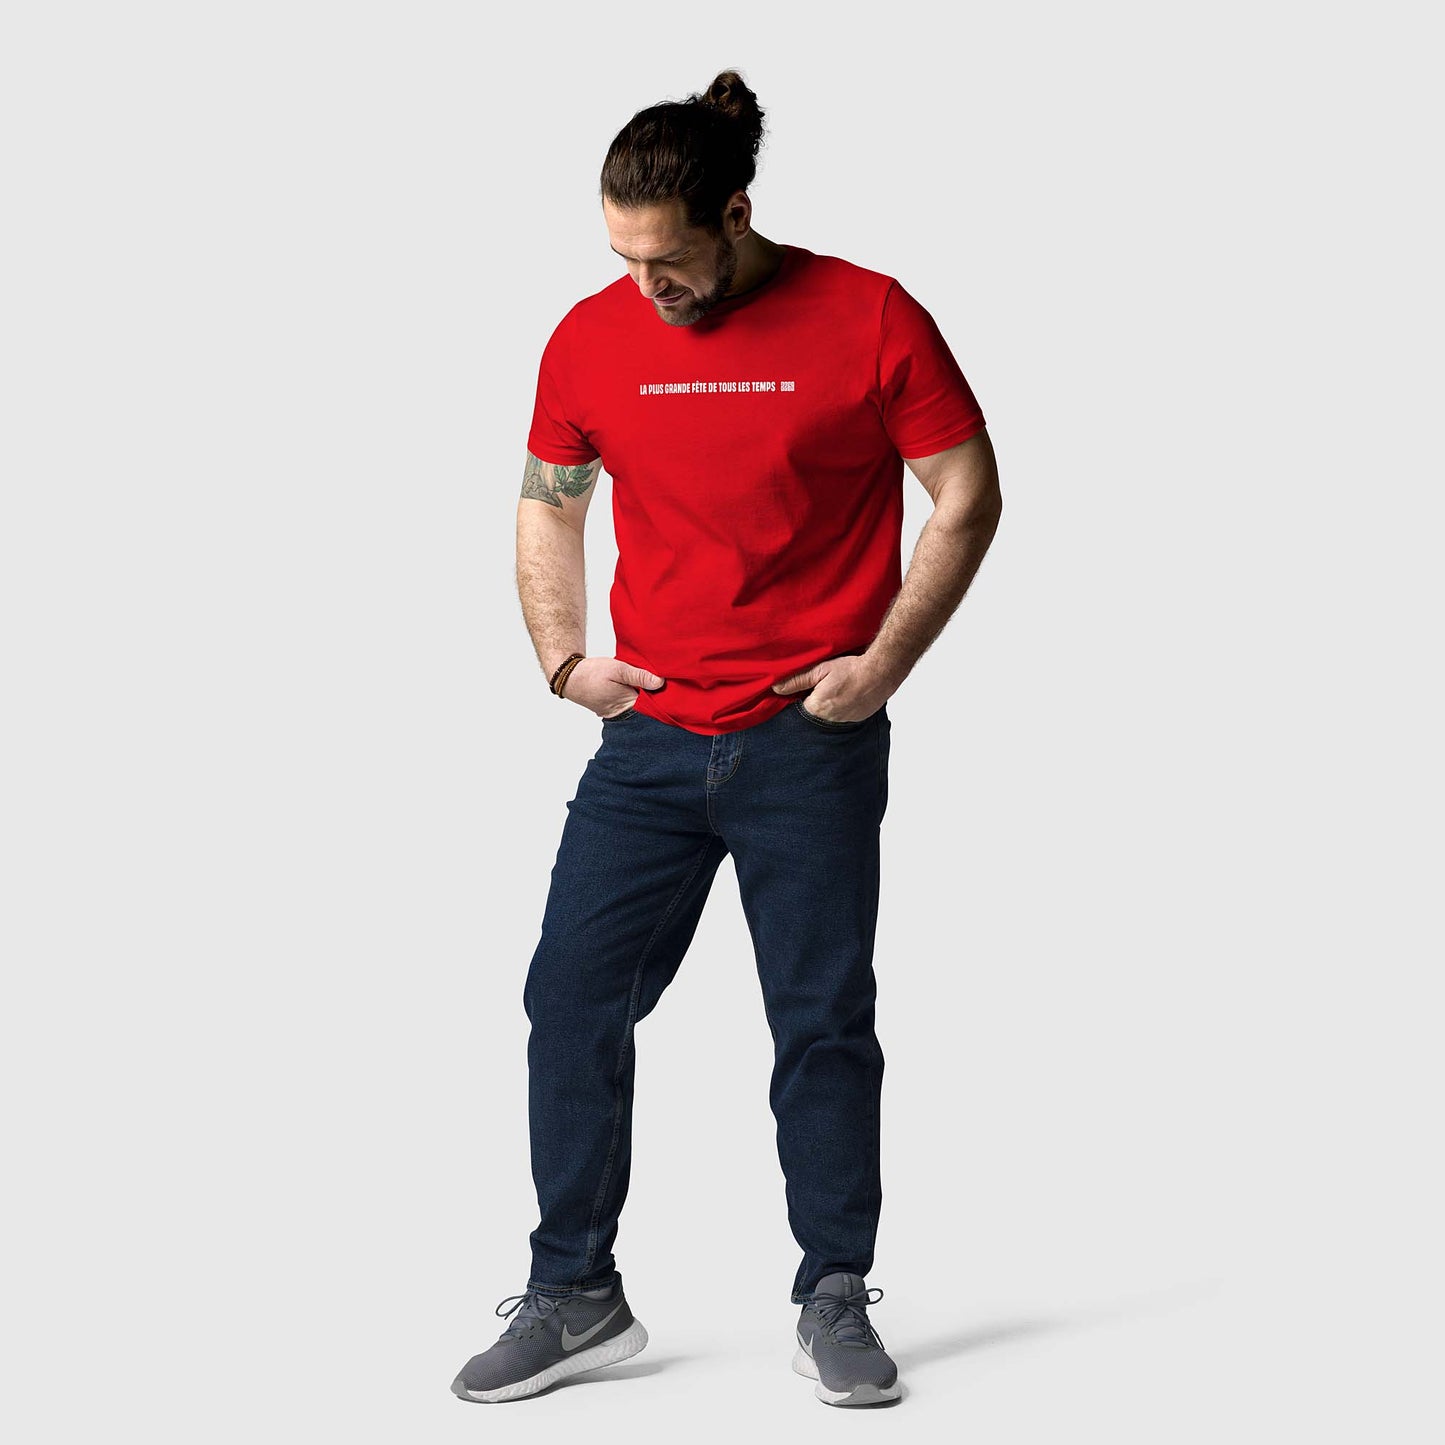 Unisex red organic cotton t-shirt with French 2269 party line